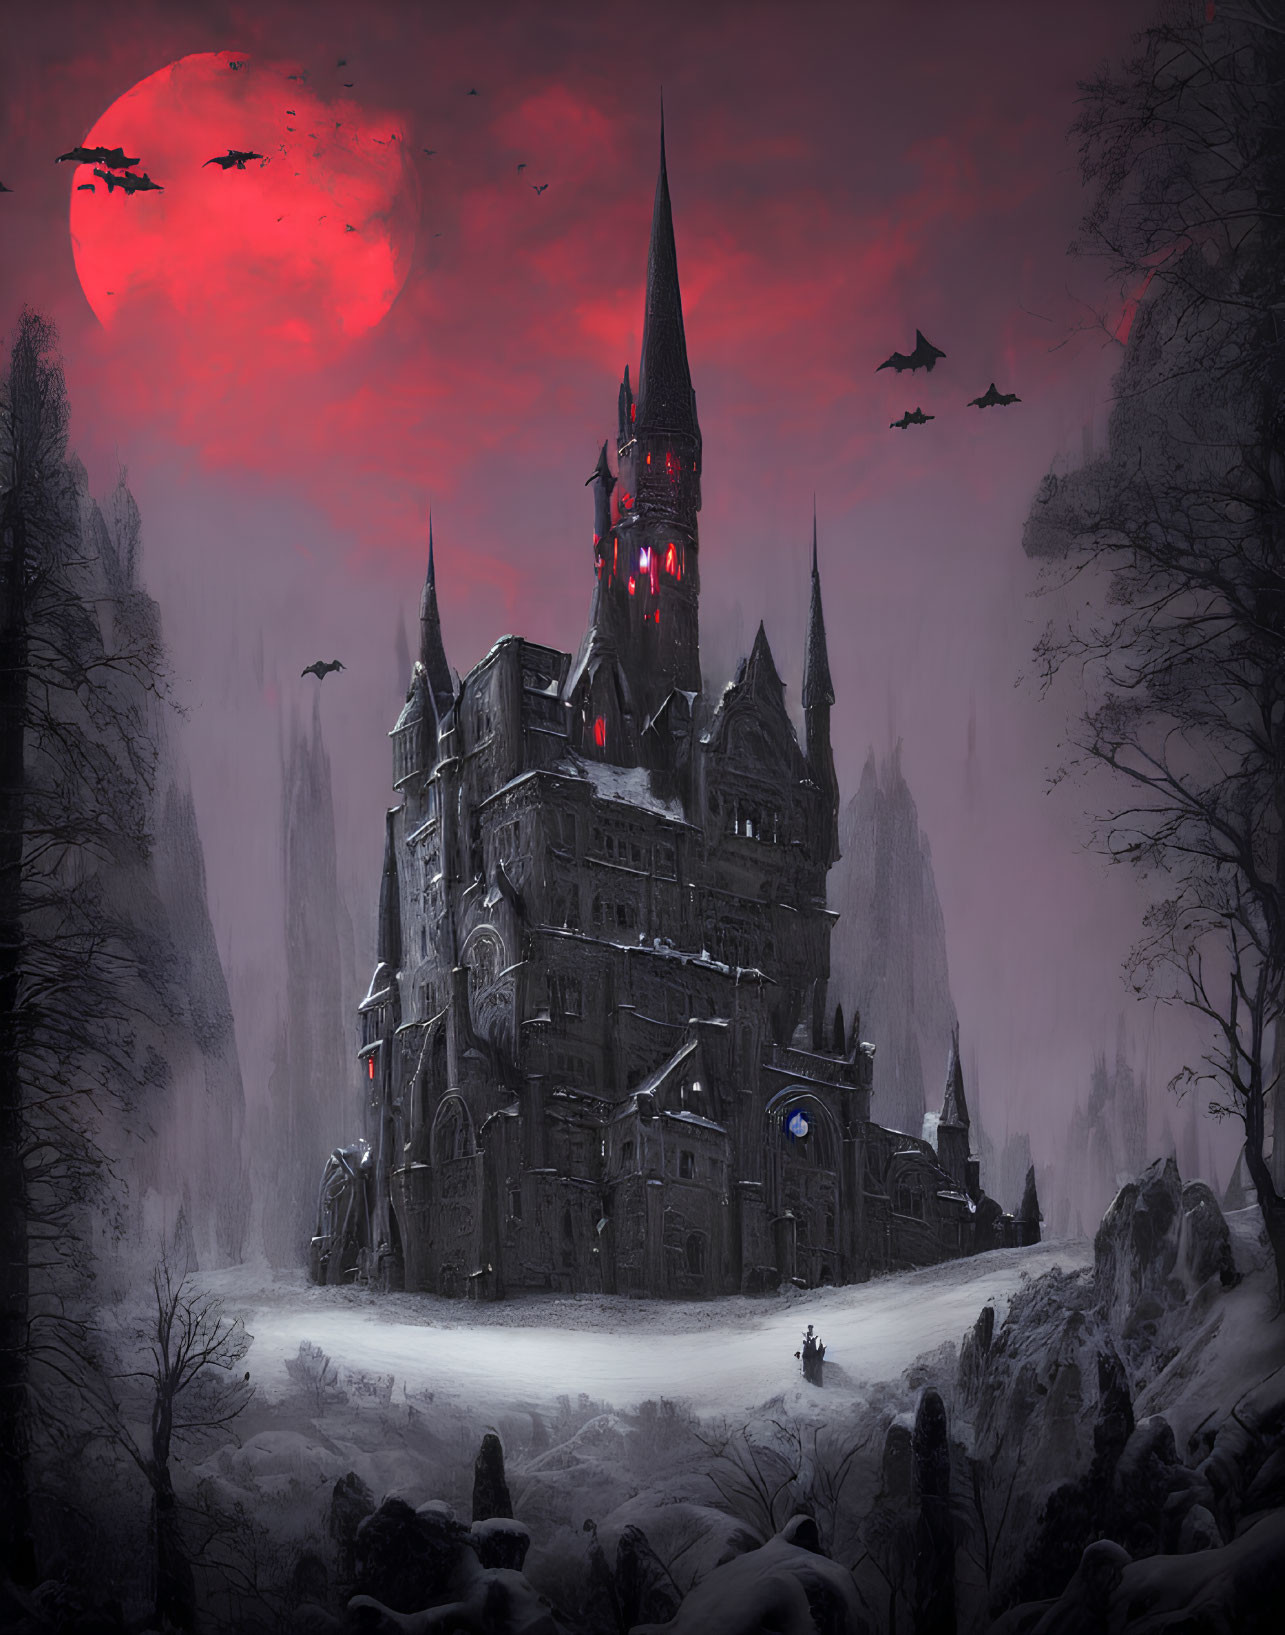 Gothic castle under blood-red moon in snowy landscape